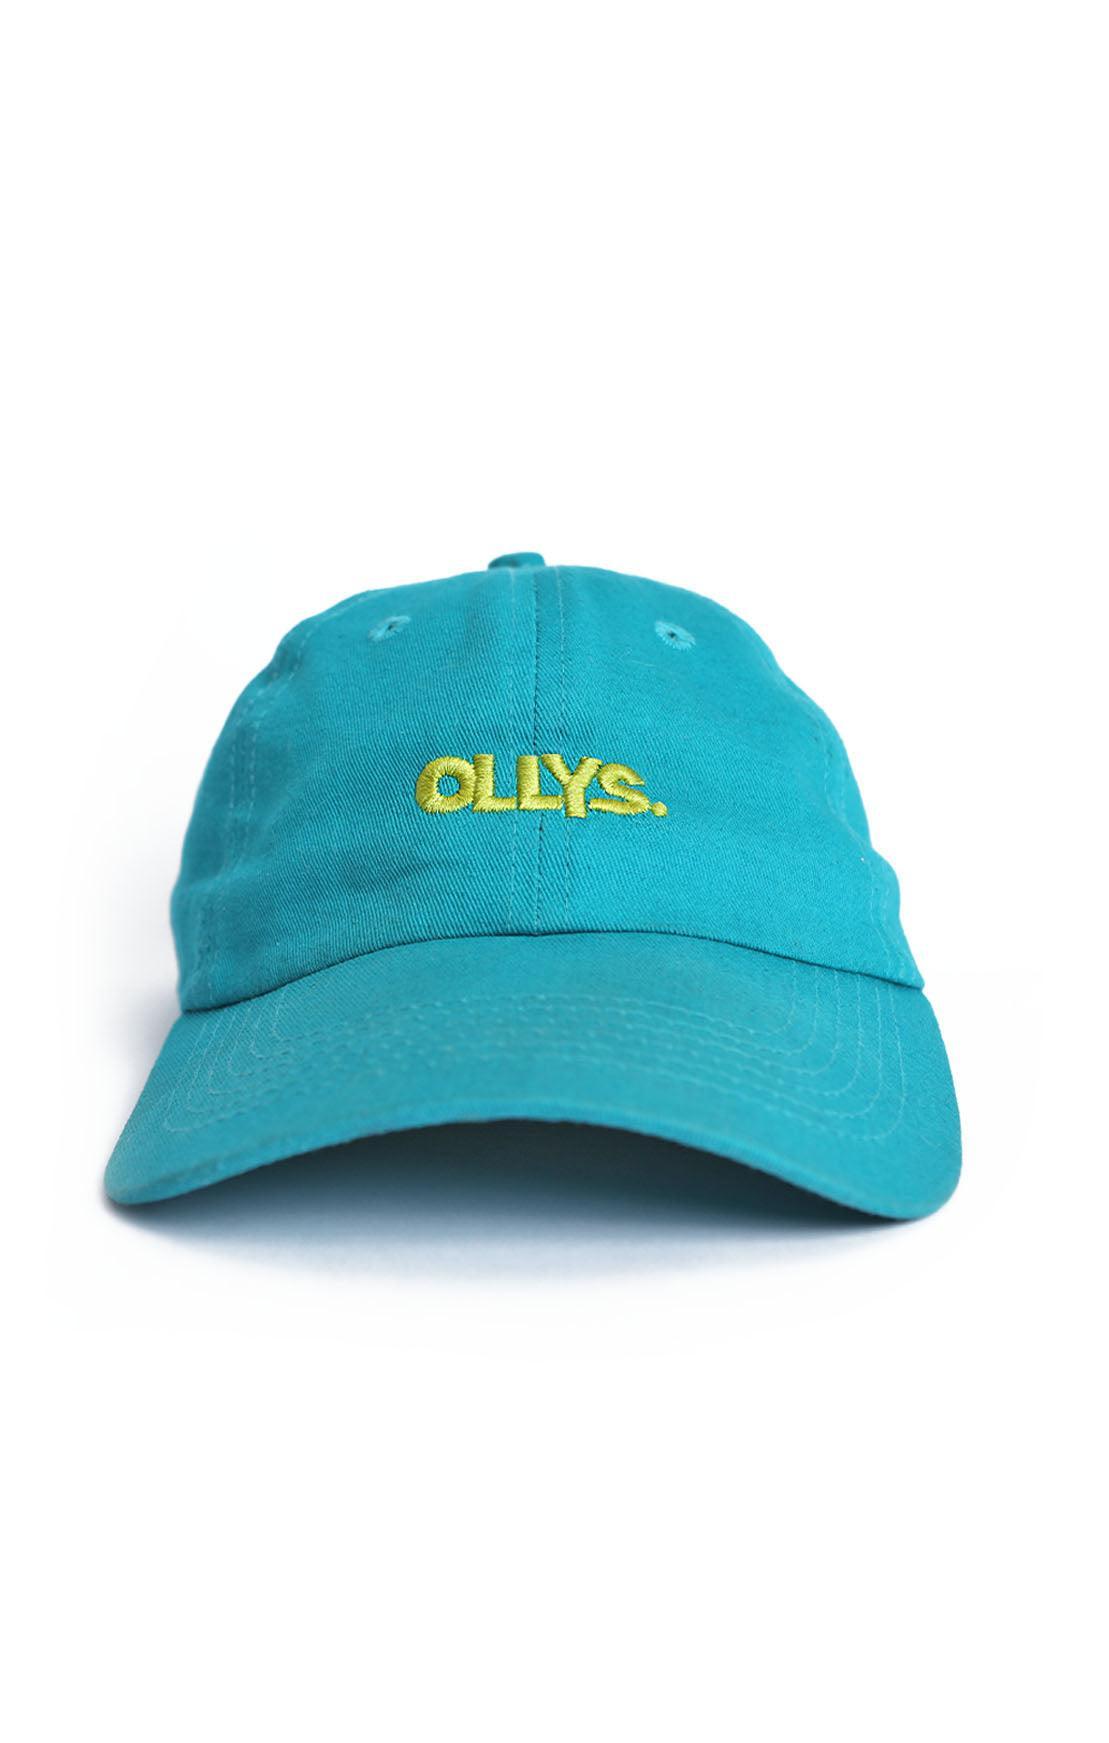 OLLYS. Teal Cotton Cap with Lime Logo - Elsie & Fred